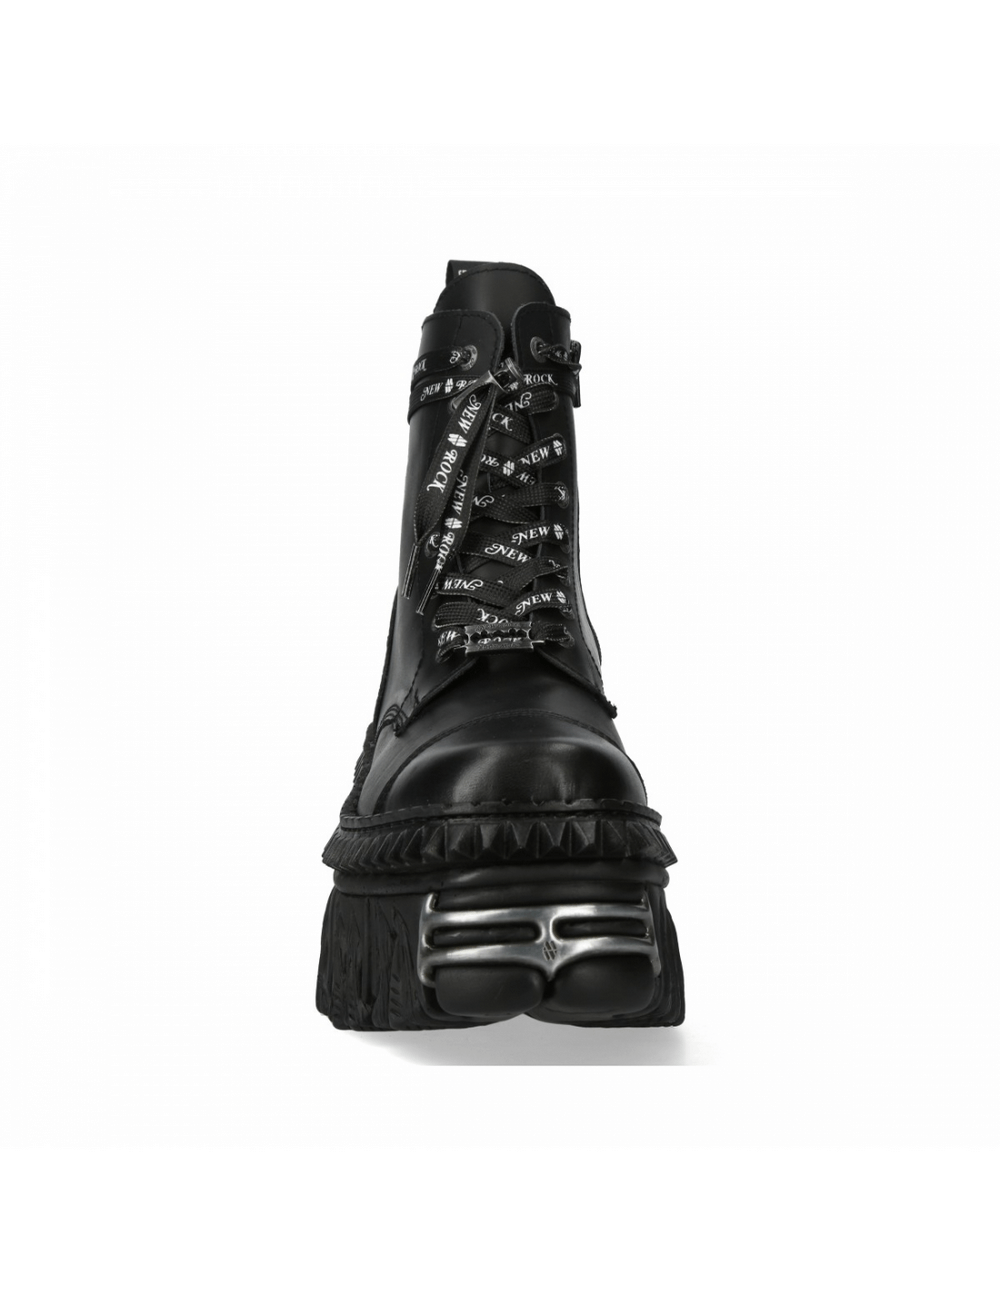 NEW ROCK Women's Black Ankle Boots with Lace Detail